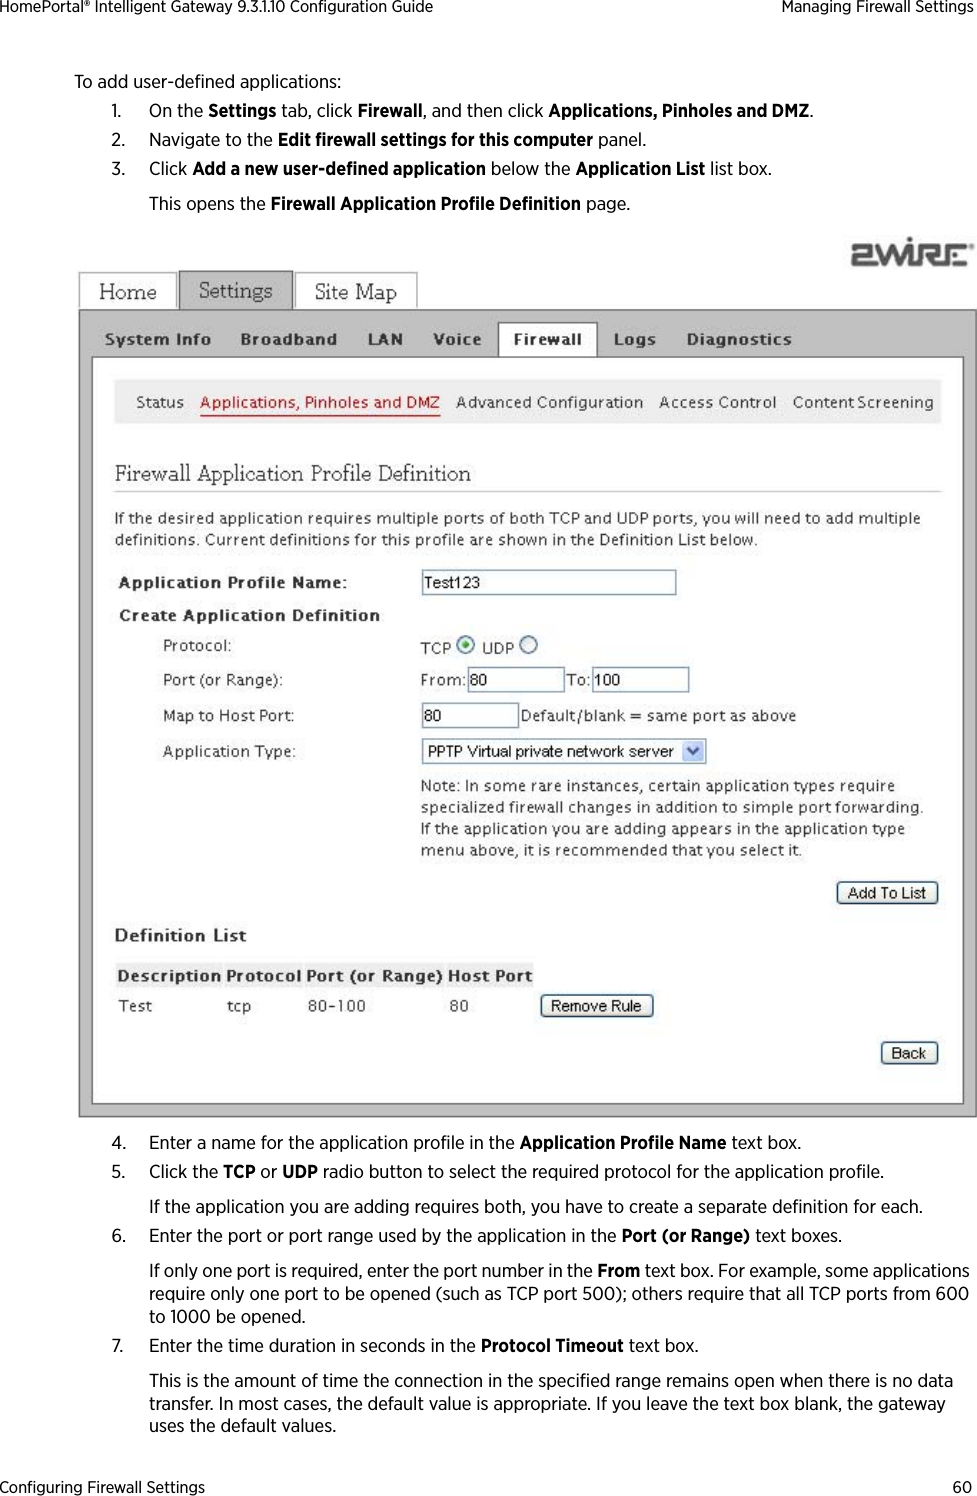 Configuring Firewall Settings 60HomePortal® Intelligent Gateway 9.3.1.10 Configuration Guide Managing Firewall SettingsTo add user-defined applications:1. On the Settings tab, click Firewall, and then click Applications, Pinholes and DMZ.2. Navigate to the Edit firewall settings for this computer panel.3. Click Add a new user-defined application below the Application List list box. This opens the Firewall Application Profile Definition page.4. Enter a name for the application profile in the Application Profile Name text box.5. Click the TCP or UDP radio button to select the required protocol for the application profile. If the application you are adding requires both, you have to create a separate definition for each.6. Enter the port or port range used by the application in the Port (or Range) text boxes. If only one port is required, enter the port number in the From text box. For example, some applications require only one port to be opened (such as TCP port 500); others require that all TCP ports from 600 to 1000 be opened.7. Enter the time duration in seconds in the Protocol Timeout text box. This is the amount of time the connection in the specified range remains open when there is no data transfer. In most cases, the default value is appropriate. If you leave the text box blank, the gateway uses the default values.